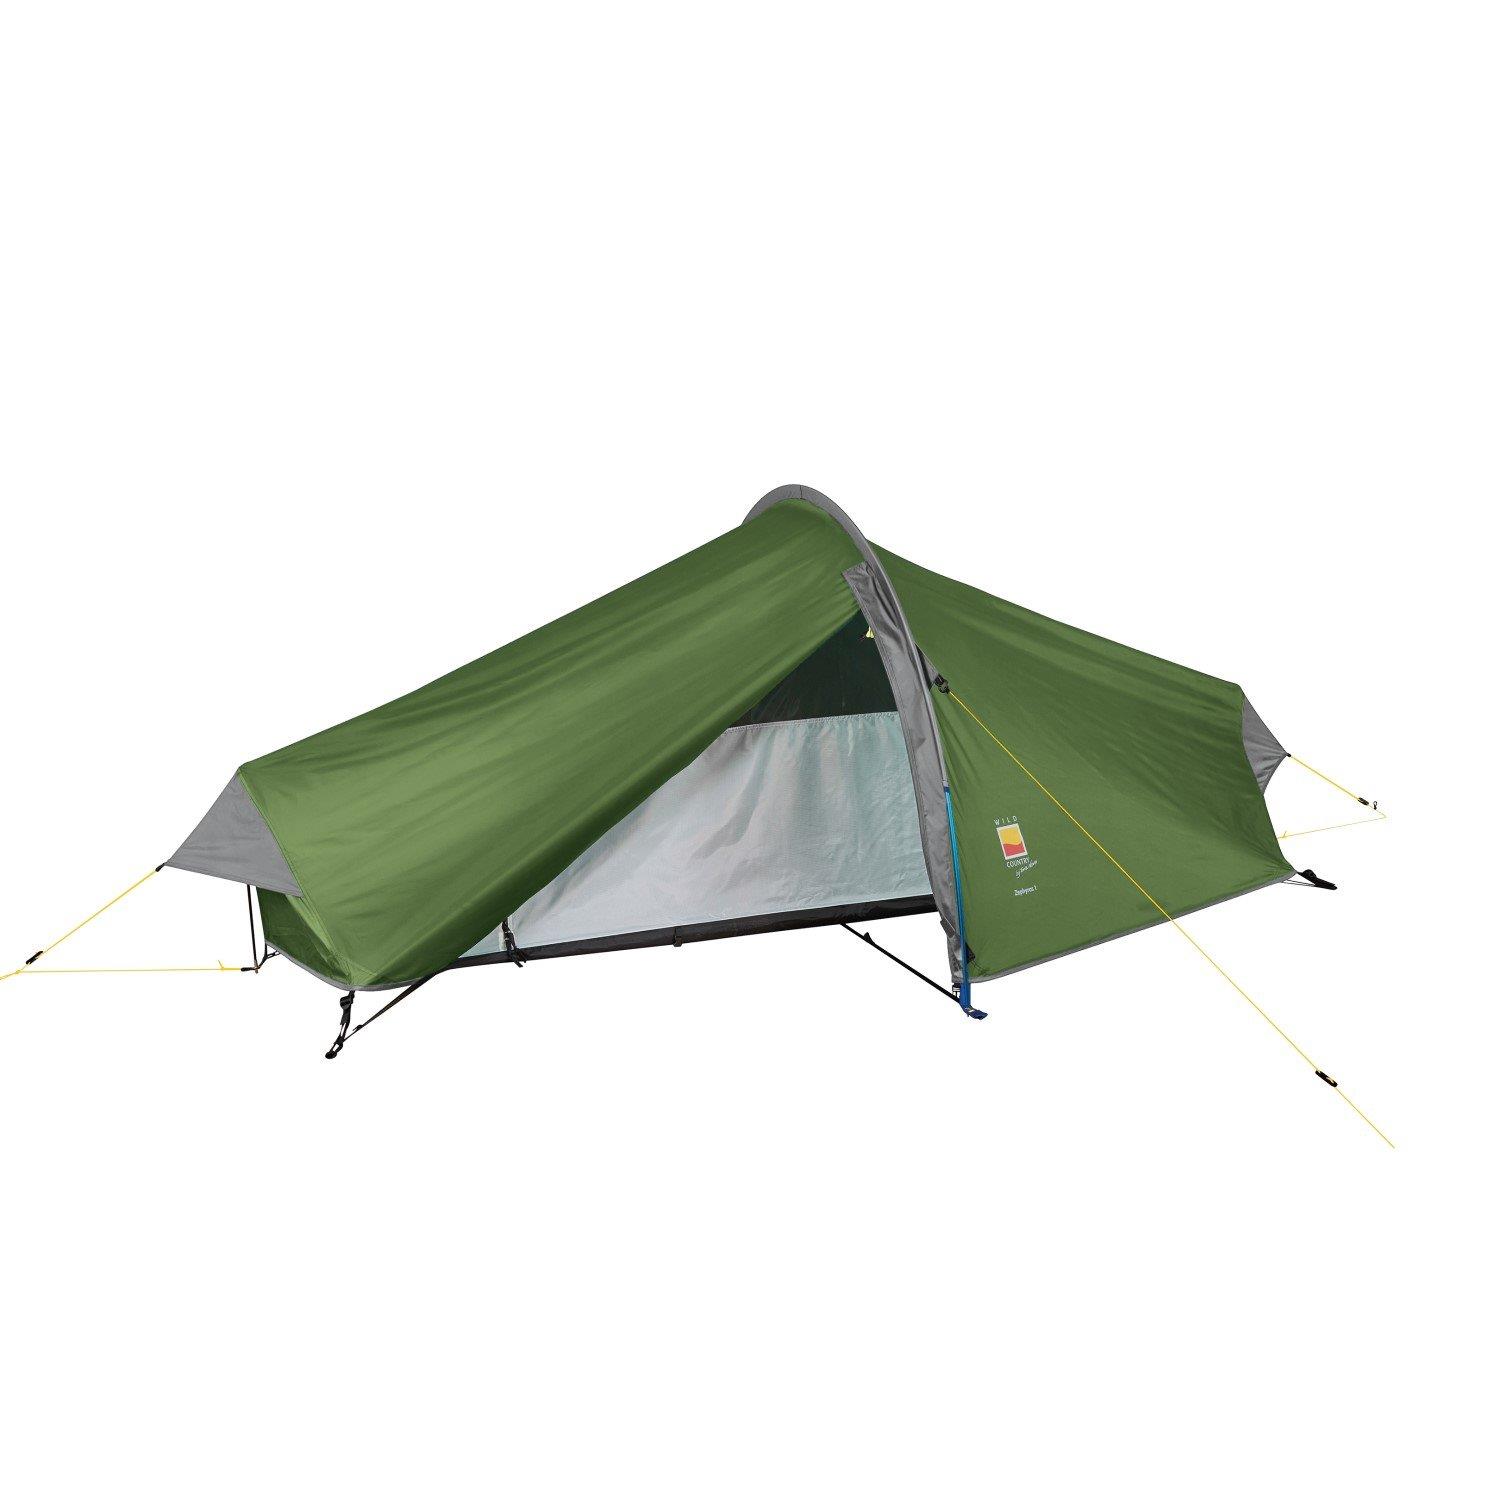 Wild Country Zephyros Compact 1 V3 Tent.jpg